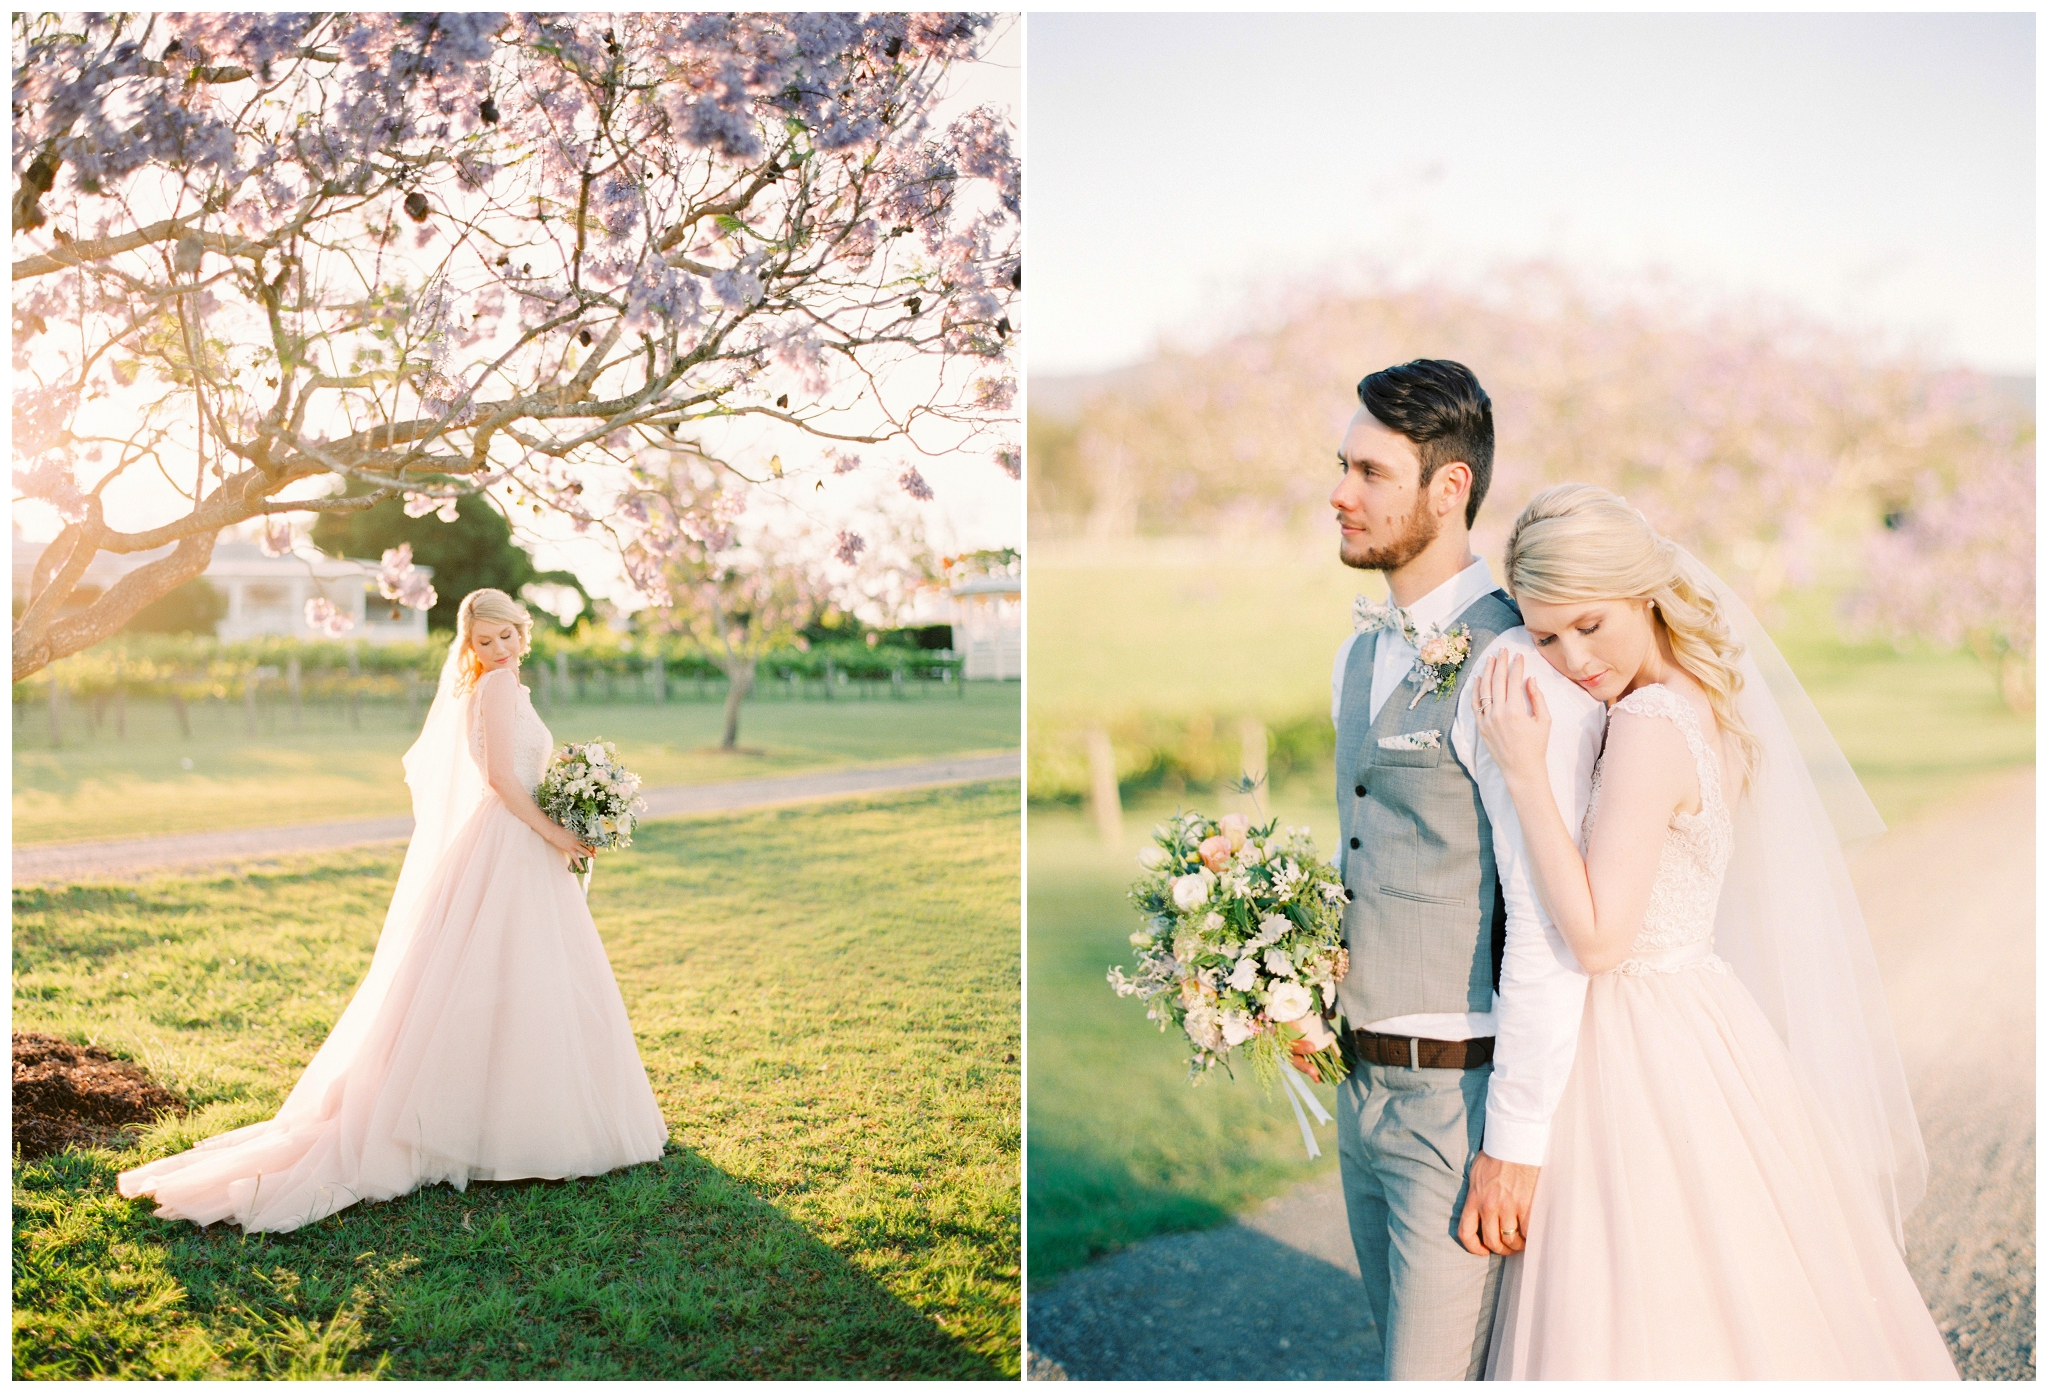 Tegan and Alex Wedding at Albert River Wines by Casey Jane Photography 62